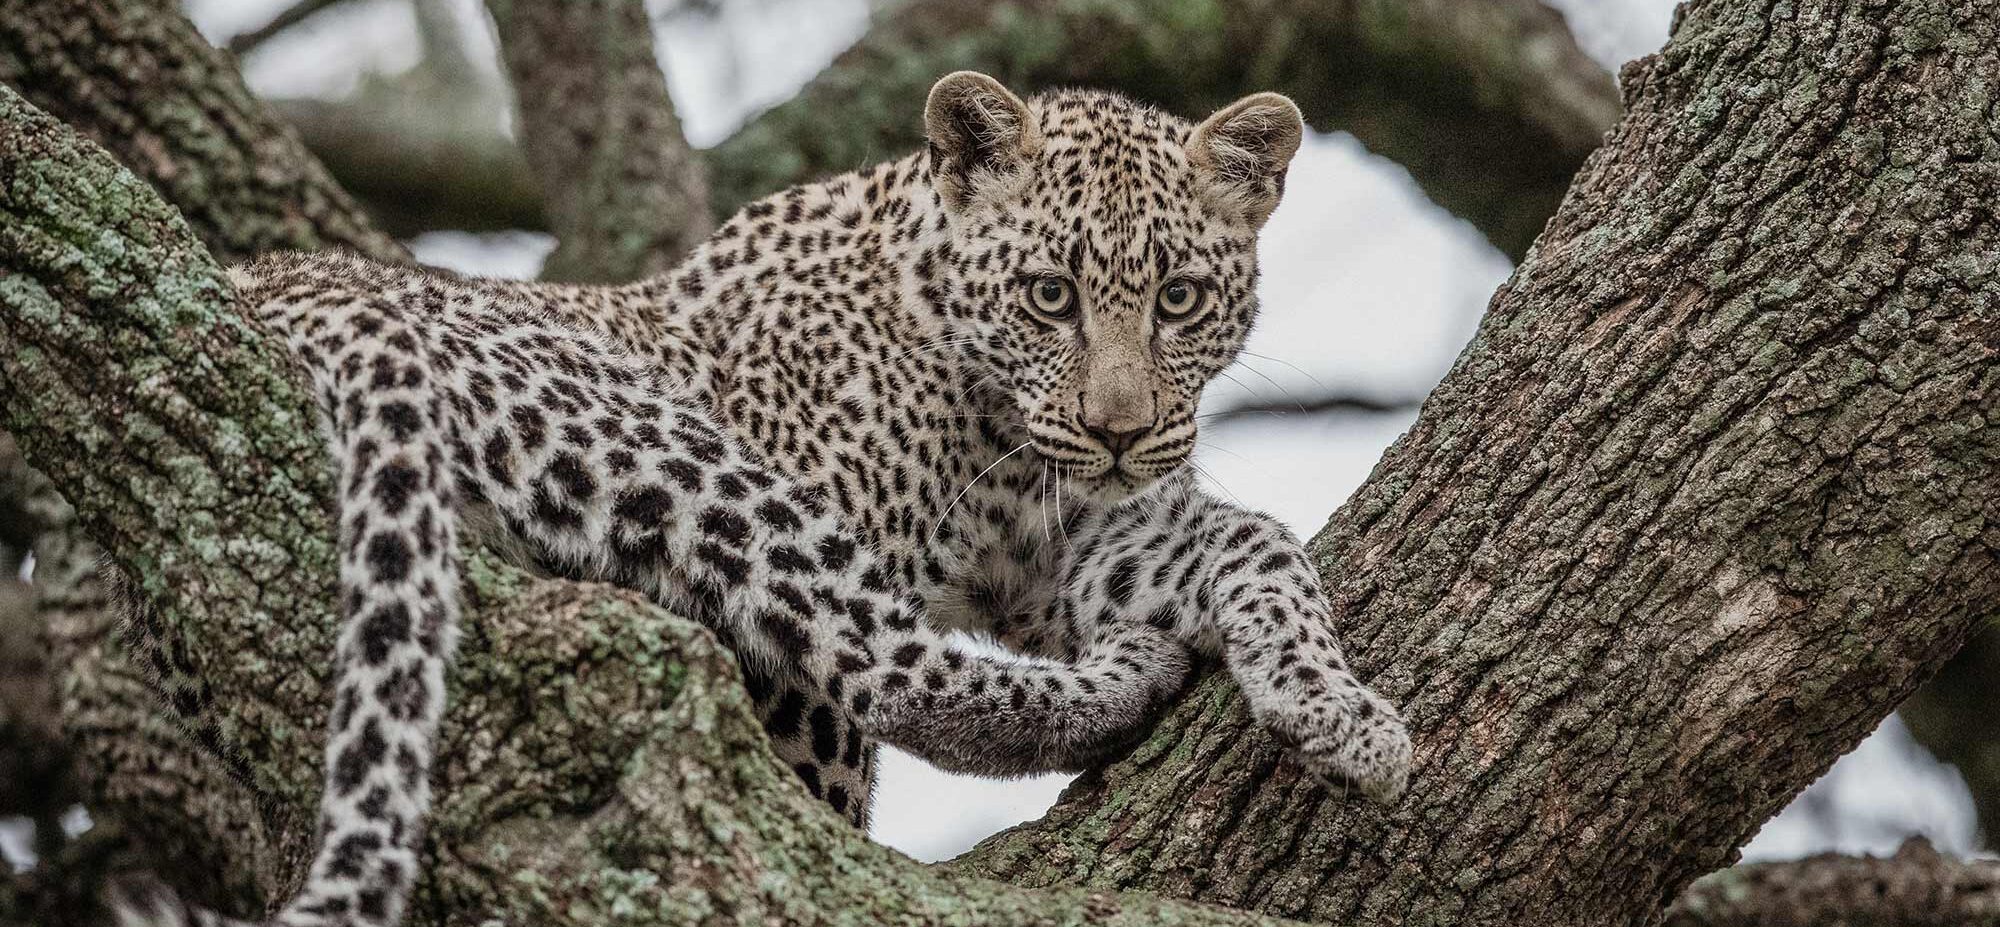 A leopard sitting in the tree branches